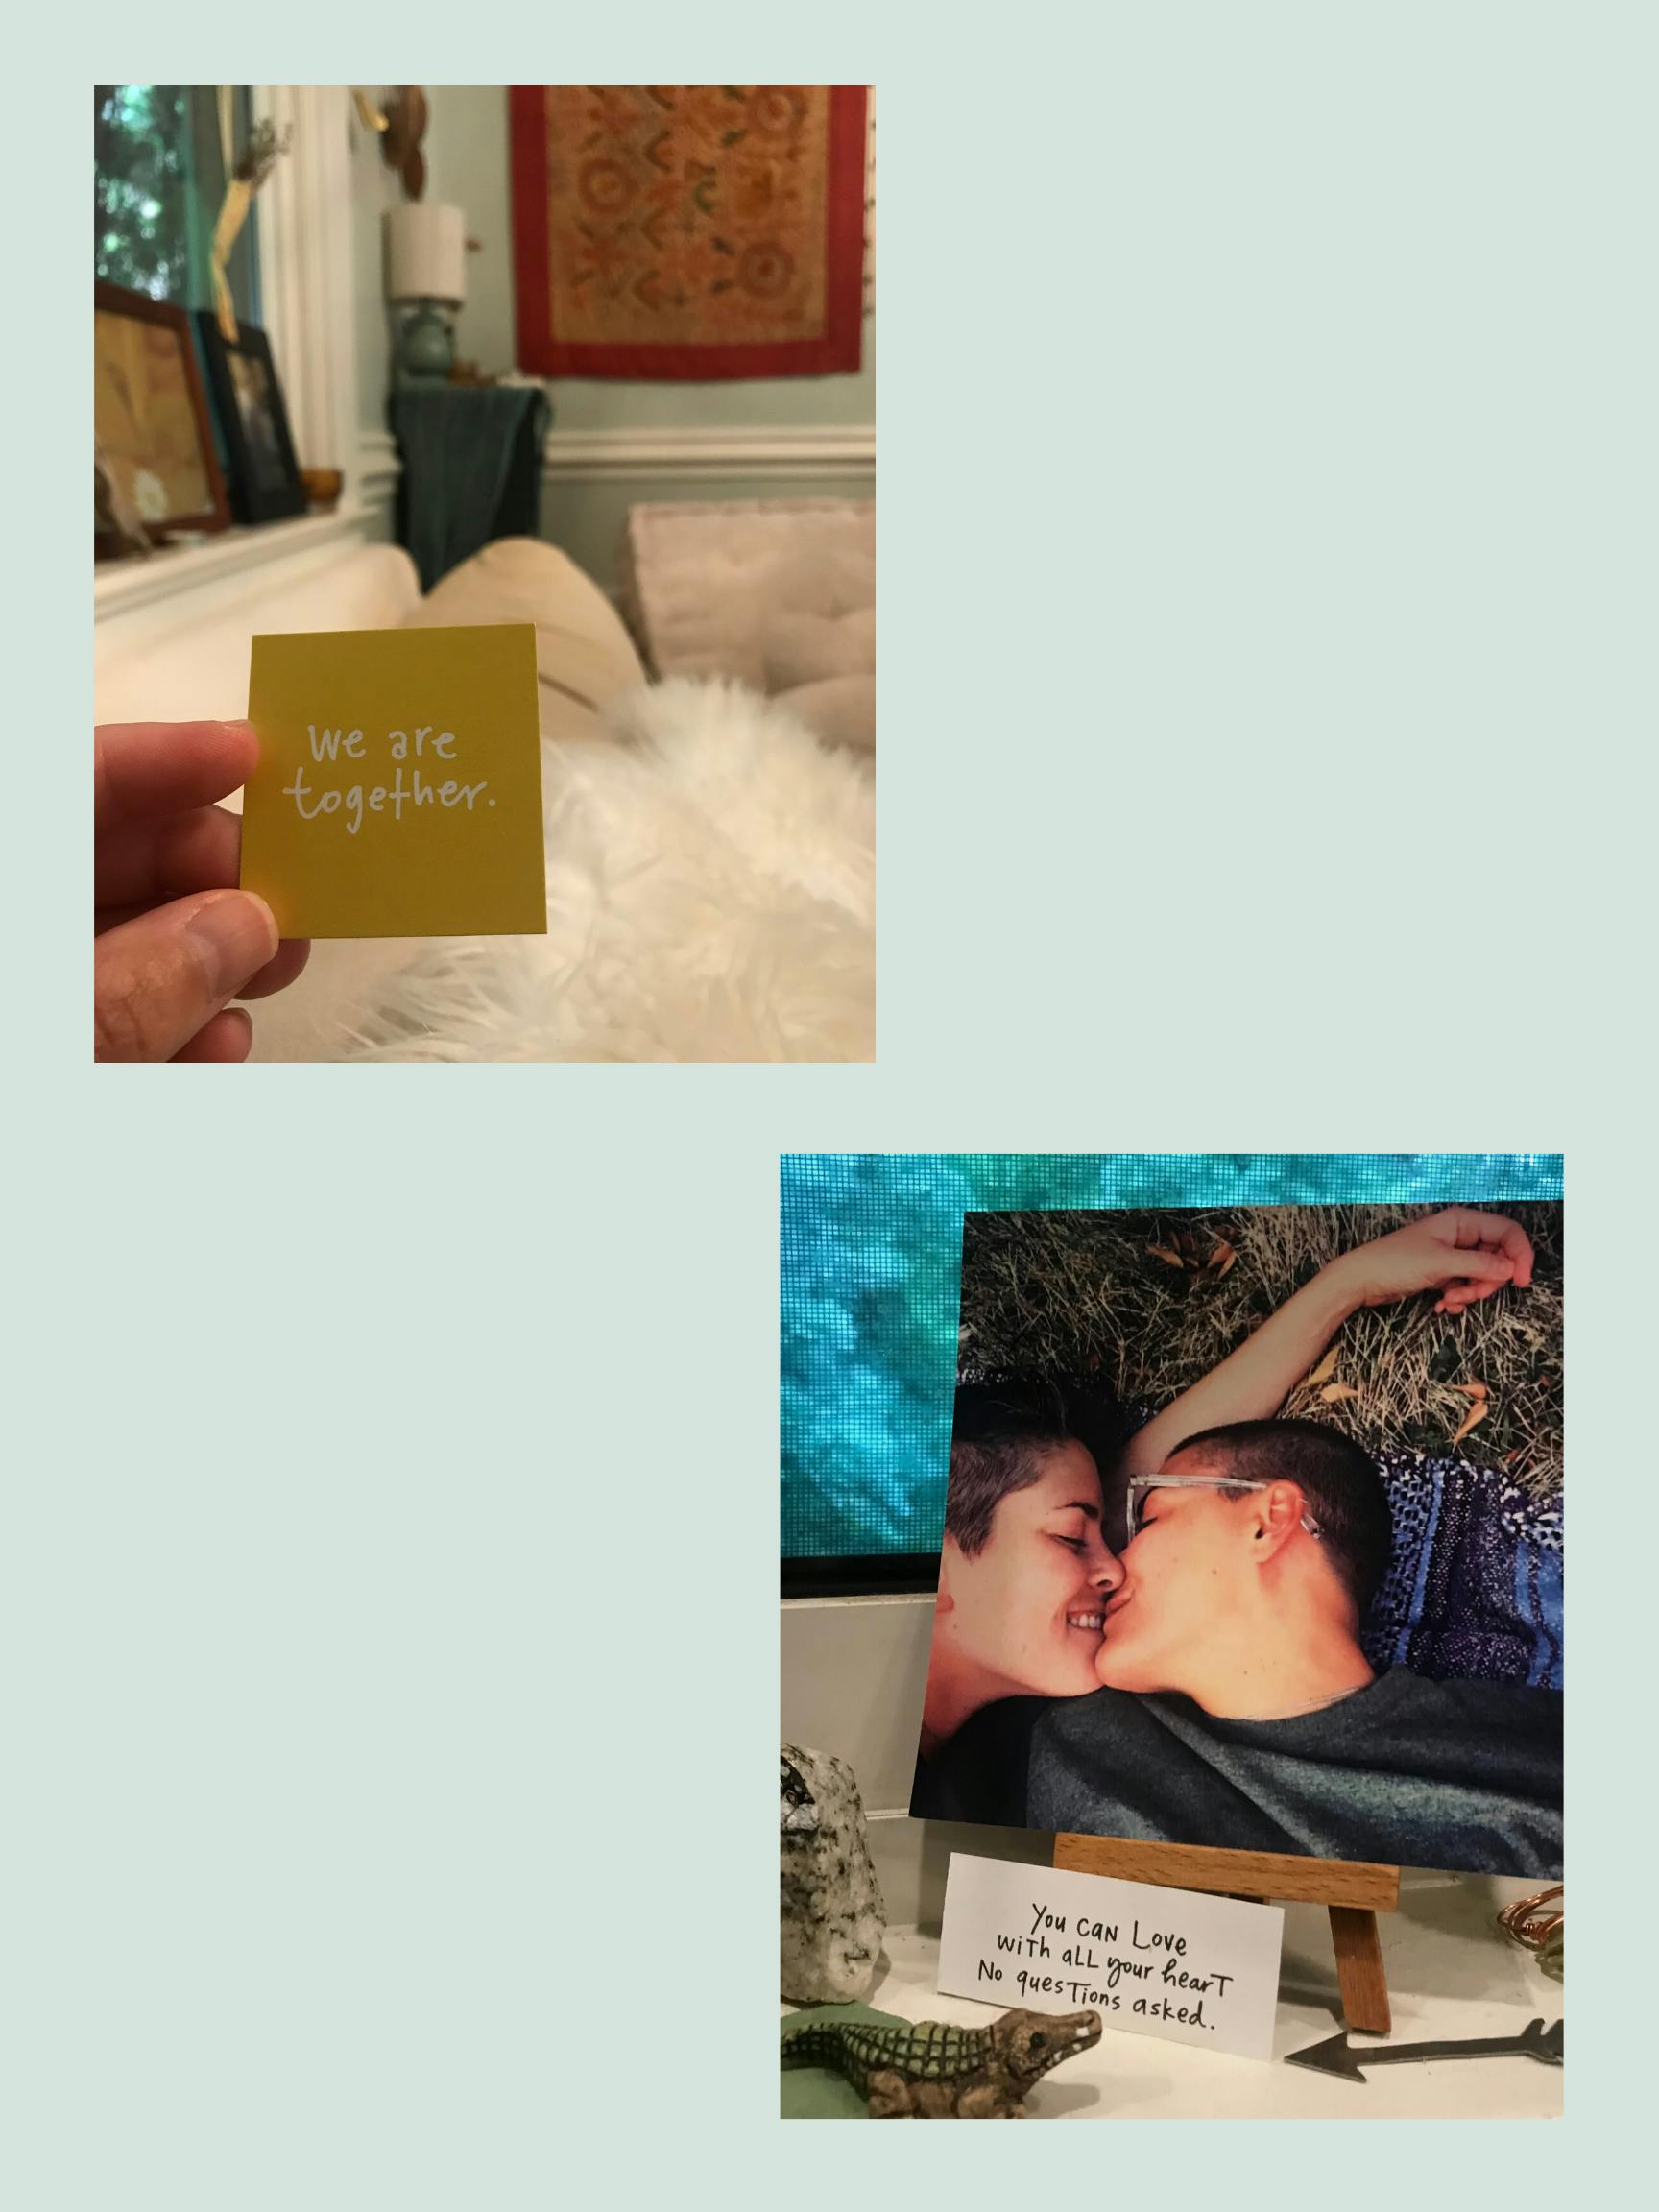 two photos on a green background. The upper left photo is of a hand holding a small yellow card that reads "we are together." The bottom right photo is of a collection of objects - a small crocodile figurine, a granite rock, a metal arrow, a card that reads "you can love with all your heart no questions asked." And a photo print of Kali and their partner kissing on a blanket in the grass.